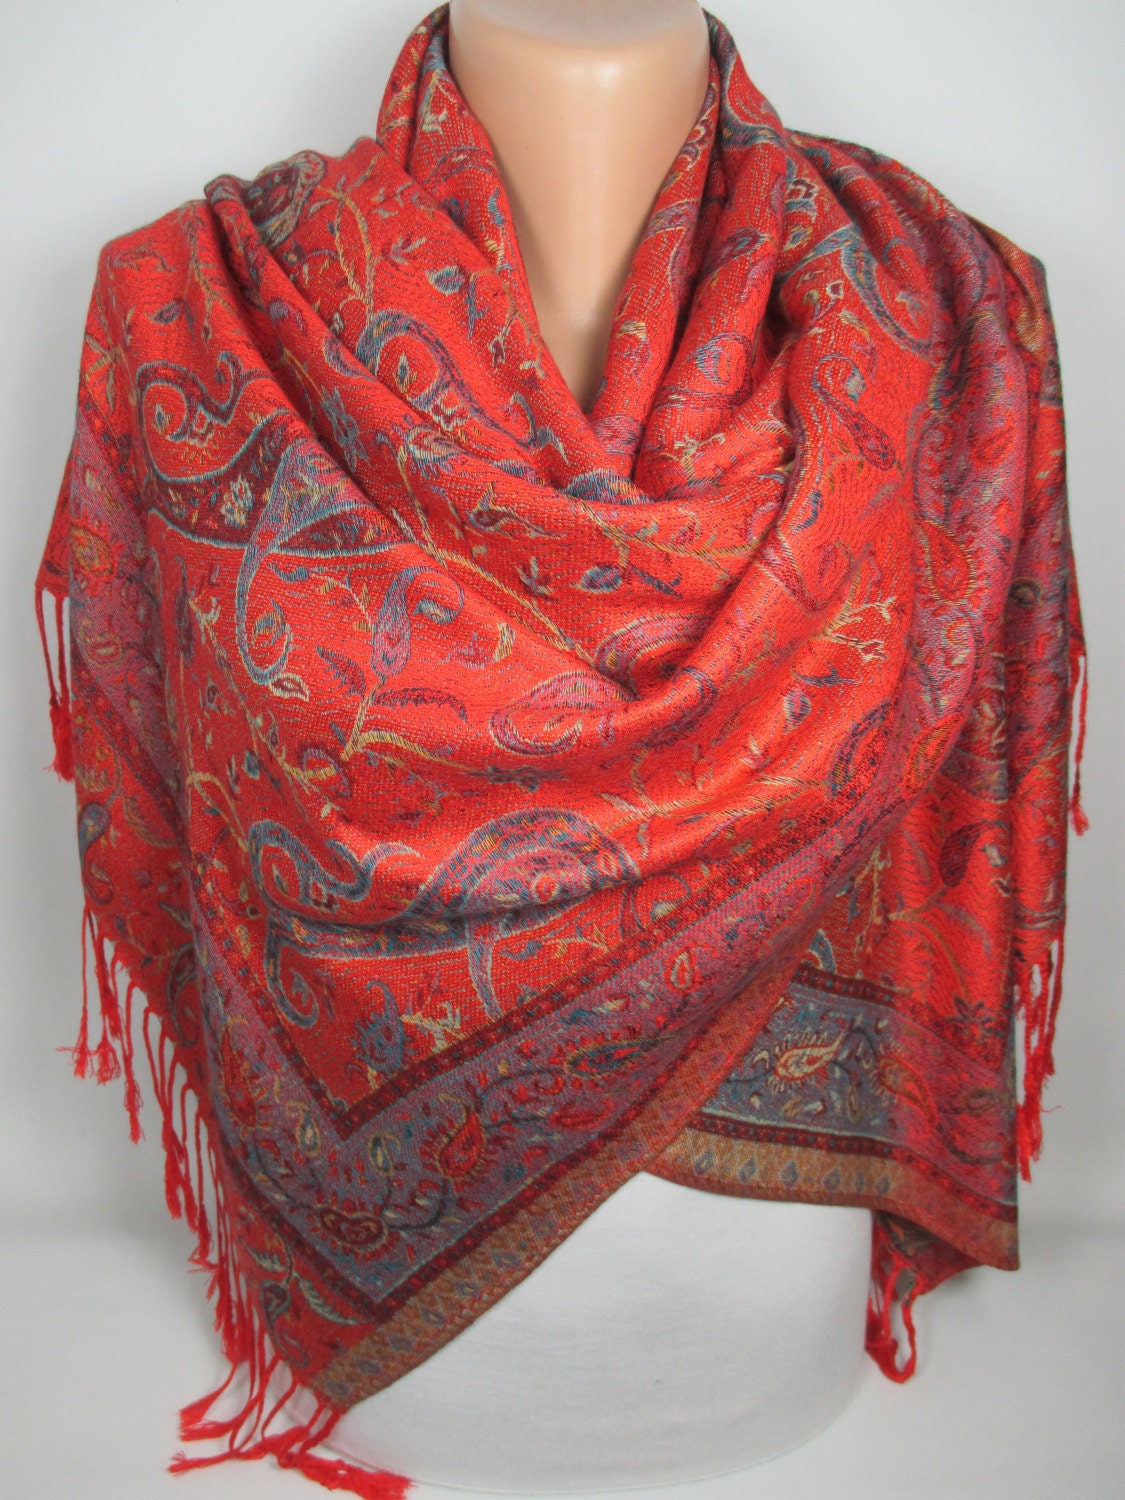 VALENTINES DAY Pashmina Scarf Oversize Scarf Red by MelScarf